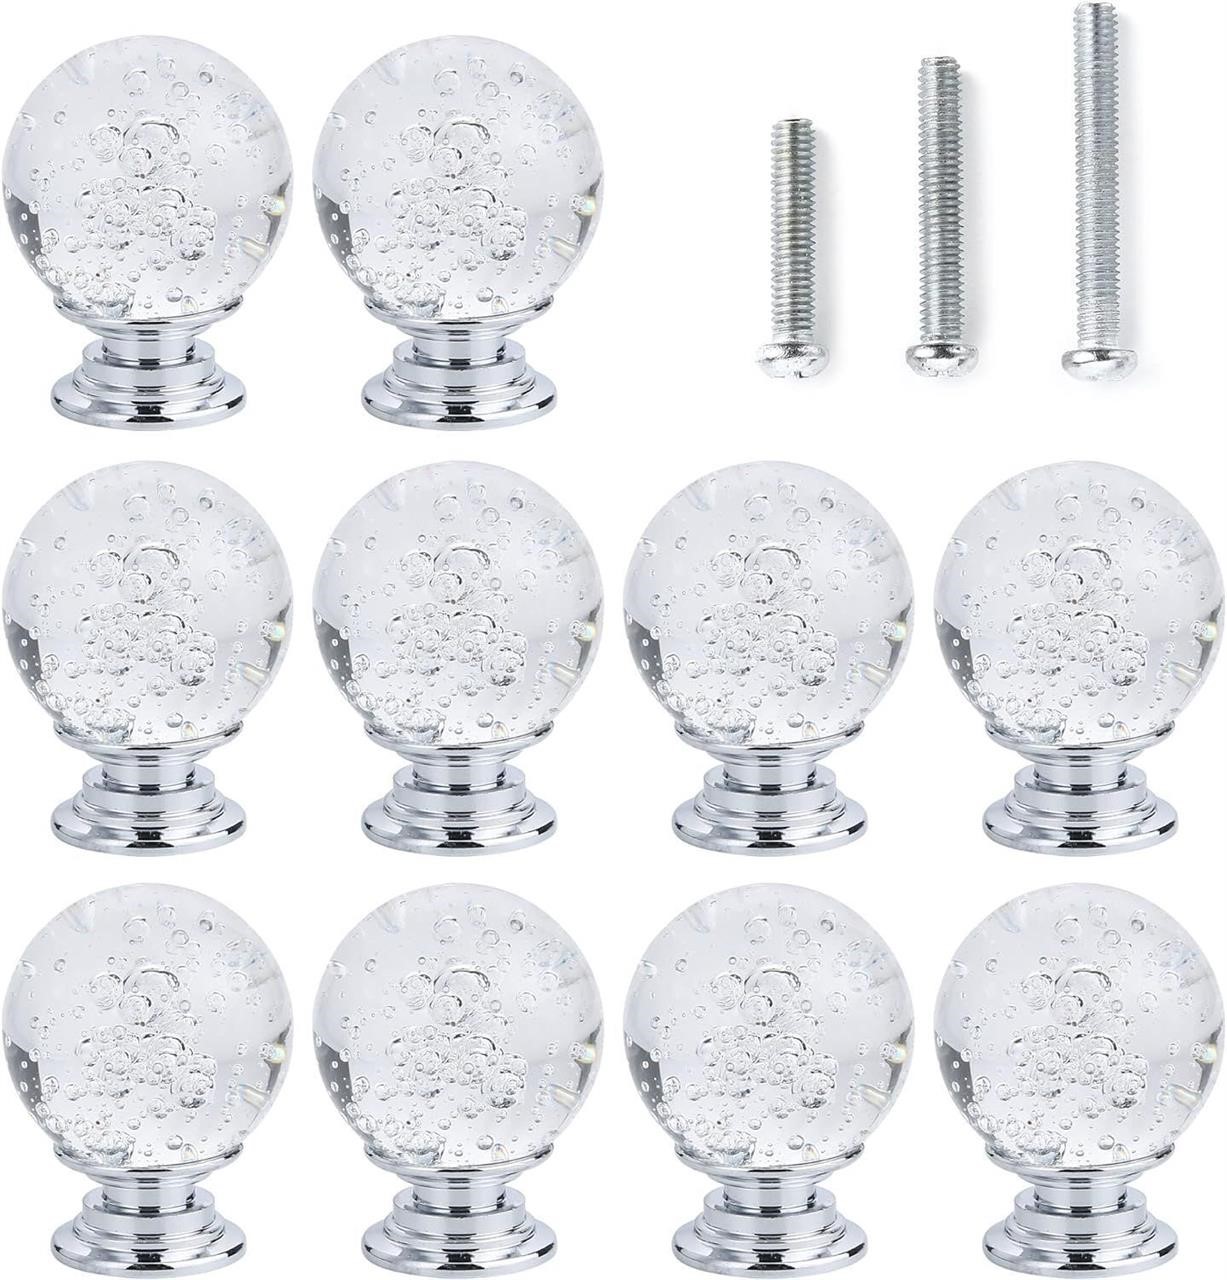 12 PCS Crystal Cabinet Knobs Round Glass